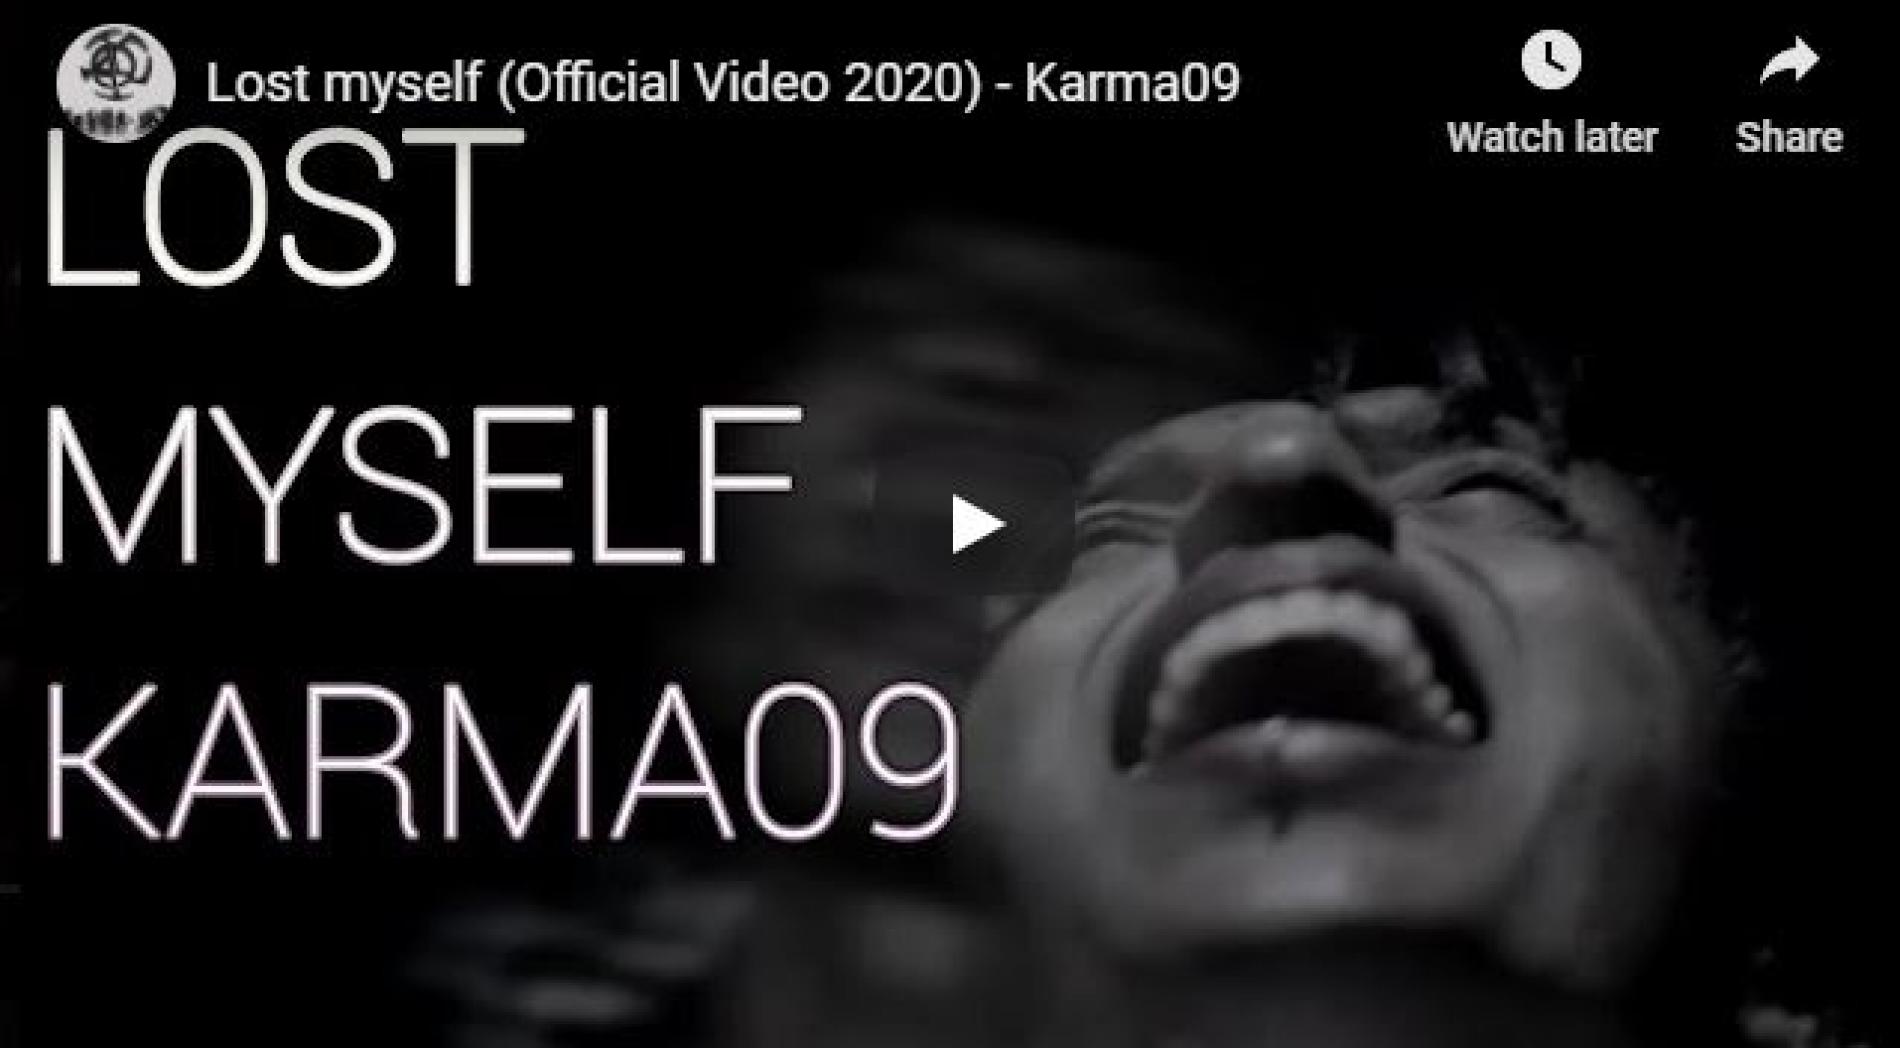 New Music : Karma09 – Lost Myself (Official Video 2020)